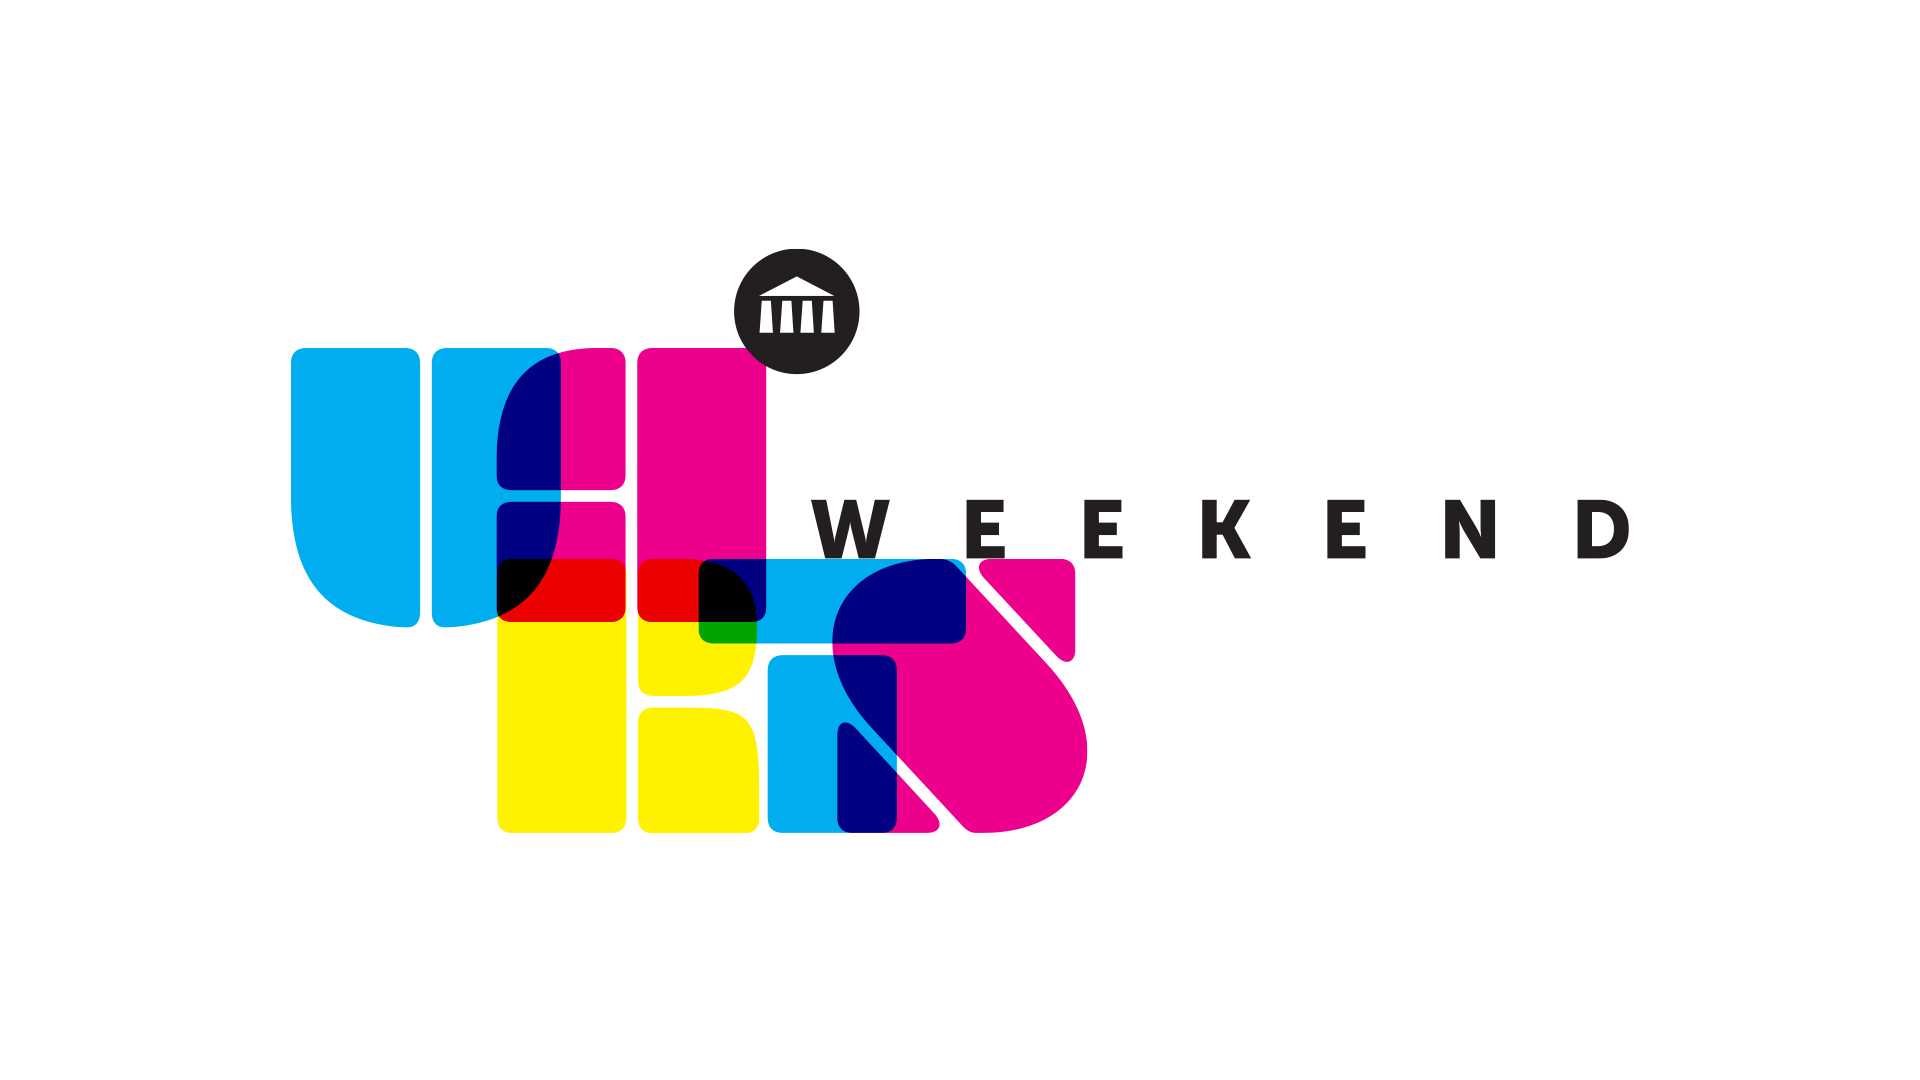 Graphic logo that reads "UArts Weekend." "UArts" is in a stylized font comprised of very thick, rounded serifs alternating between blue, magenta and yellow letters. The letters are stacked and slightly transparent creating a unique visual effect. "Weekend" is in a black, sans-serif all-caps font and sits on top of the T and S. UArts' Hamilton Icon is slightly overlapping the A in UArts.